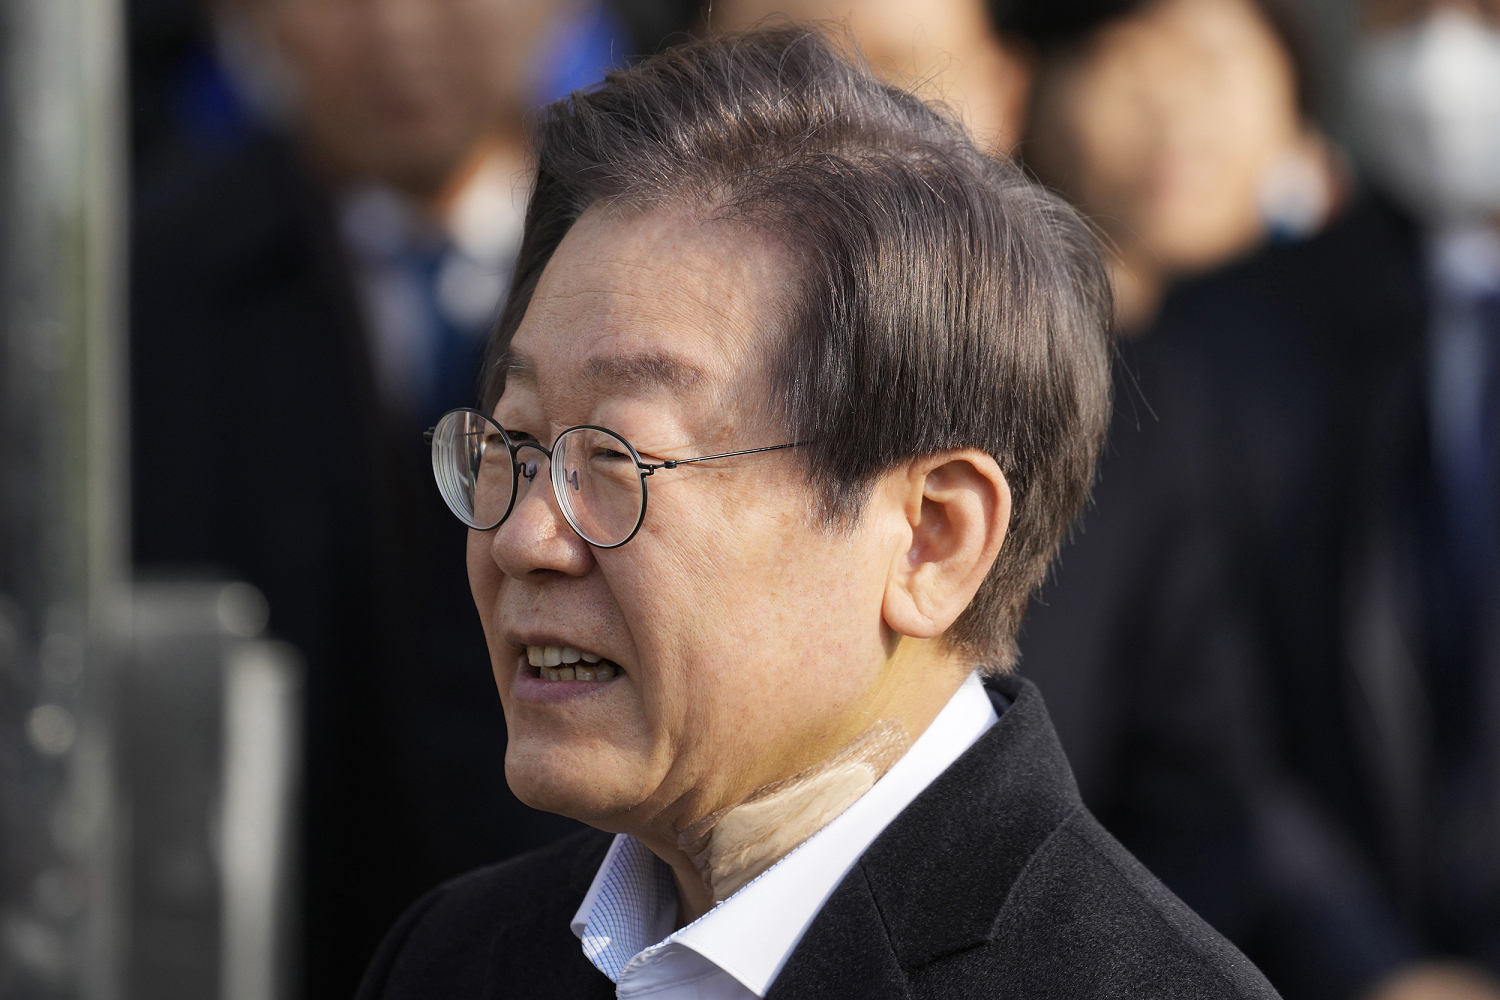 Man who stabbed South Korea’s opposition leader sentenced to 15 years in prison